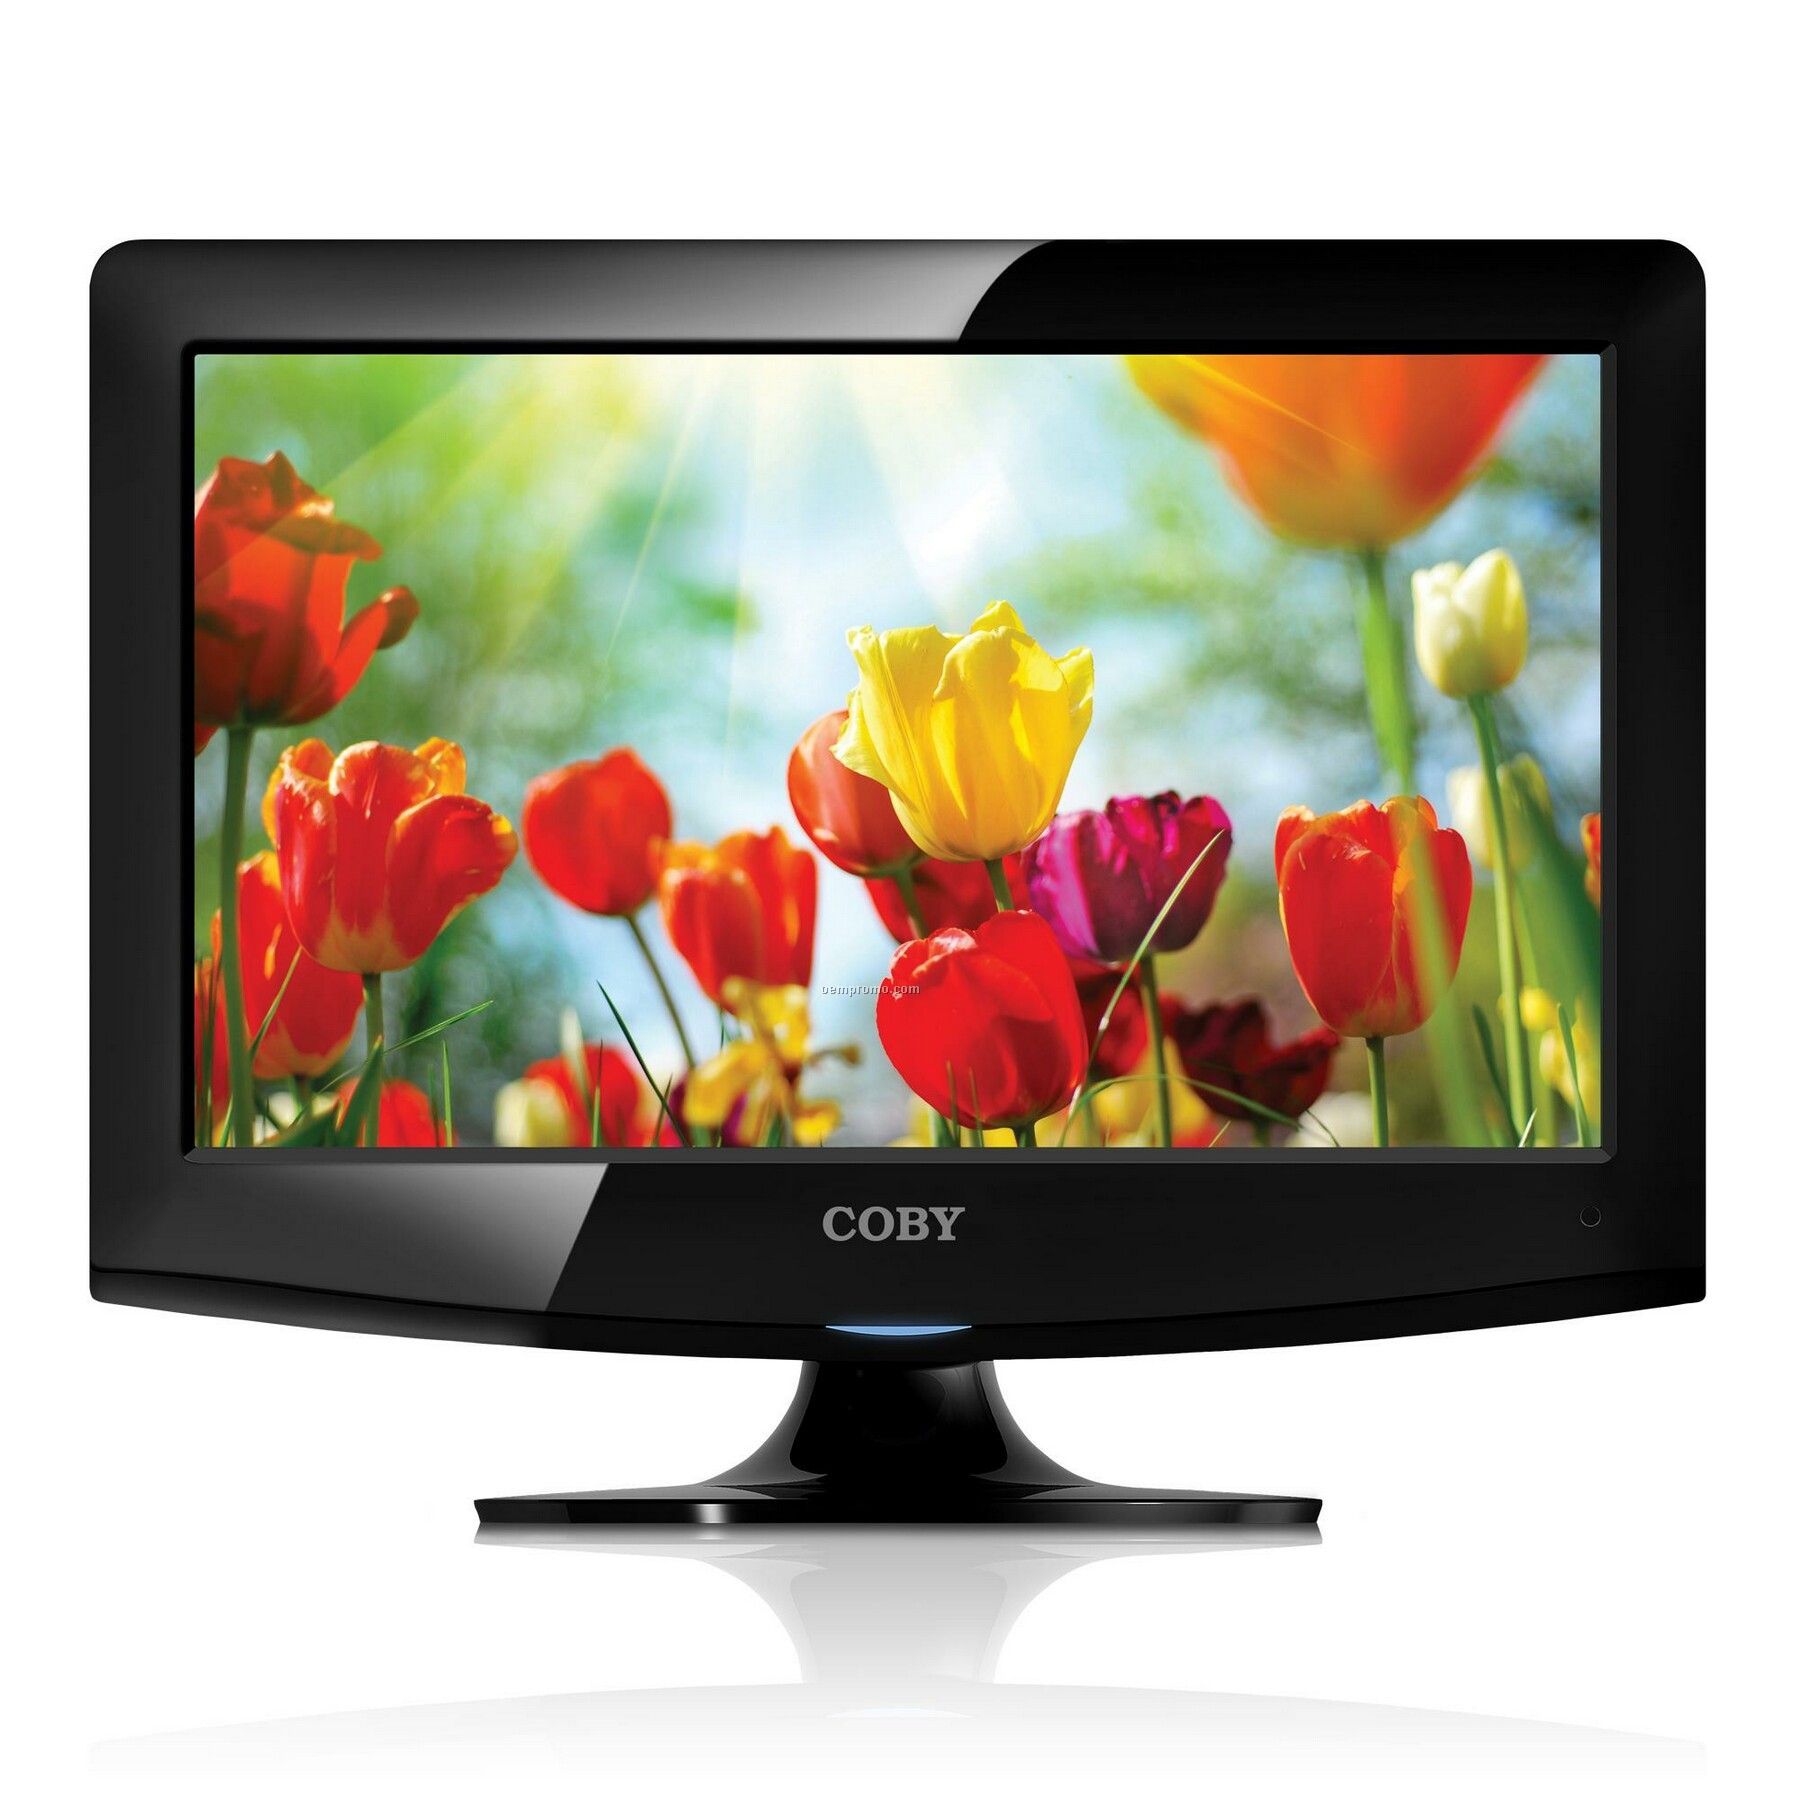 Coby 13" LED Television